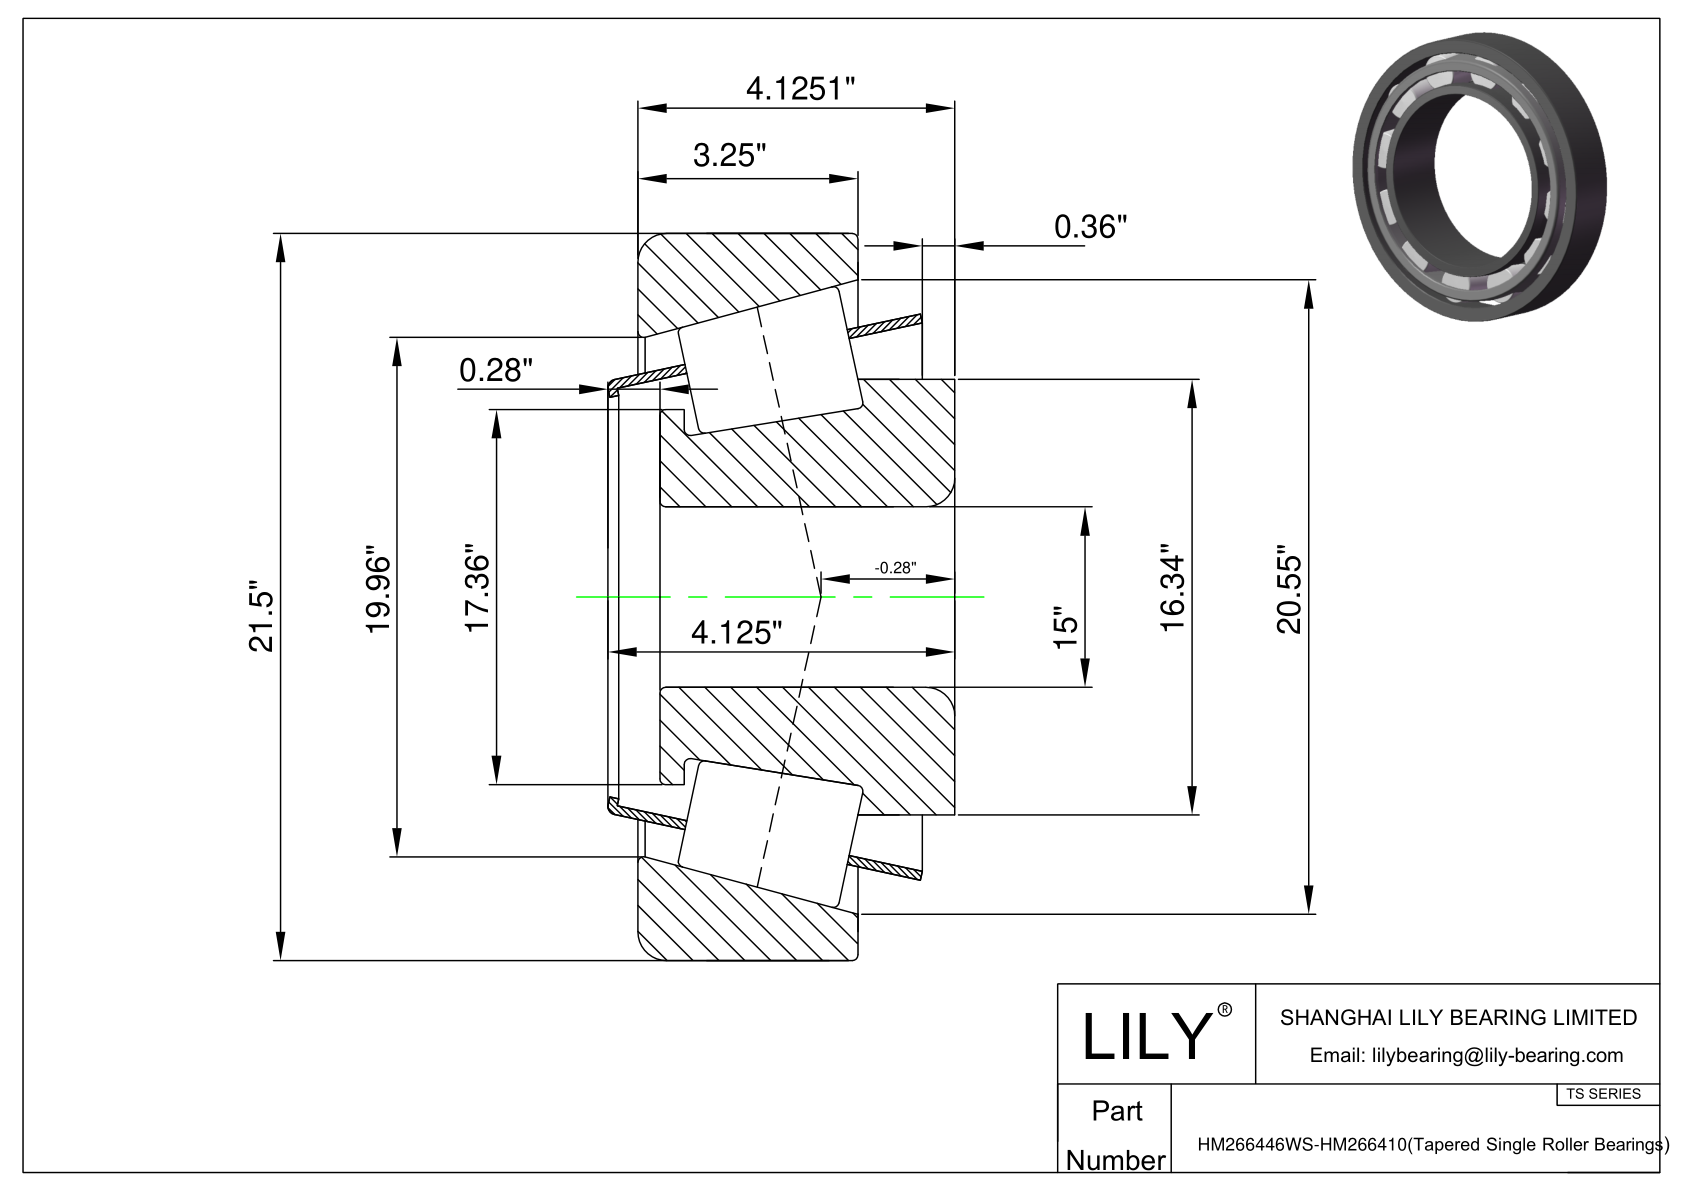 HM266446WS-HM266410 TS (Tapered Single Roller Bearings) (Imperial) cad drawing